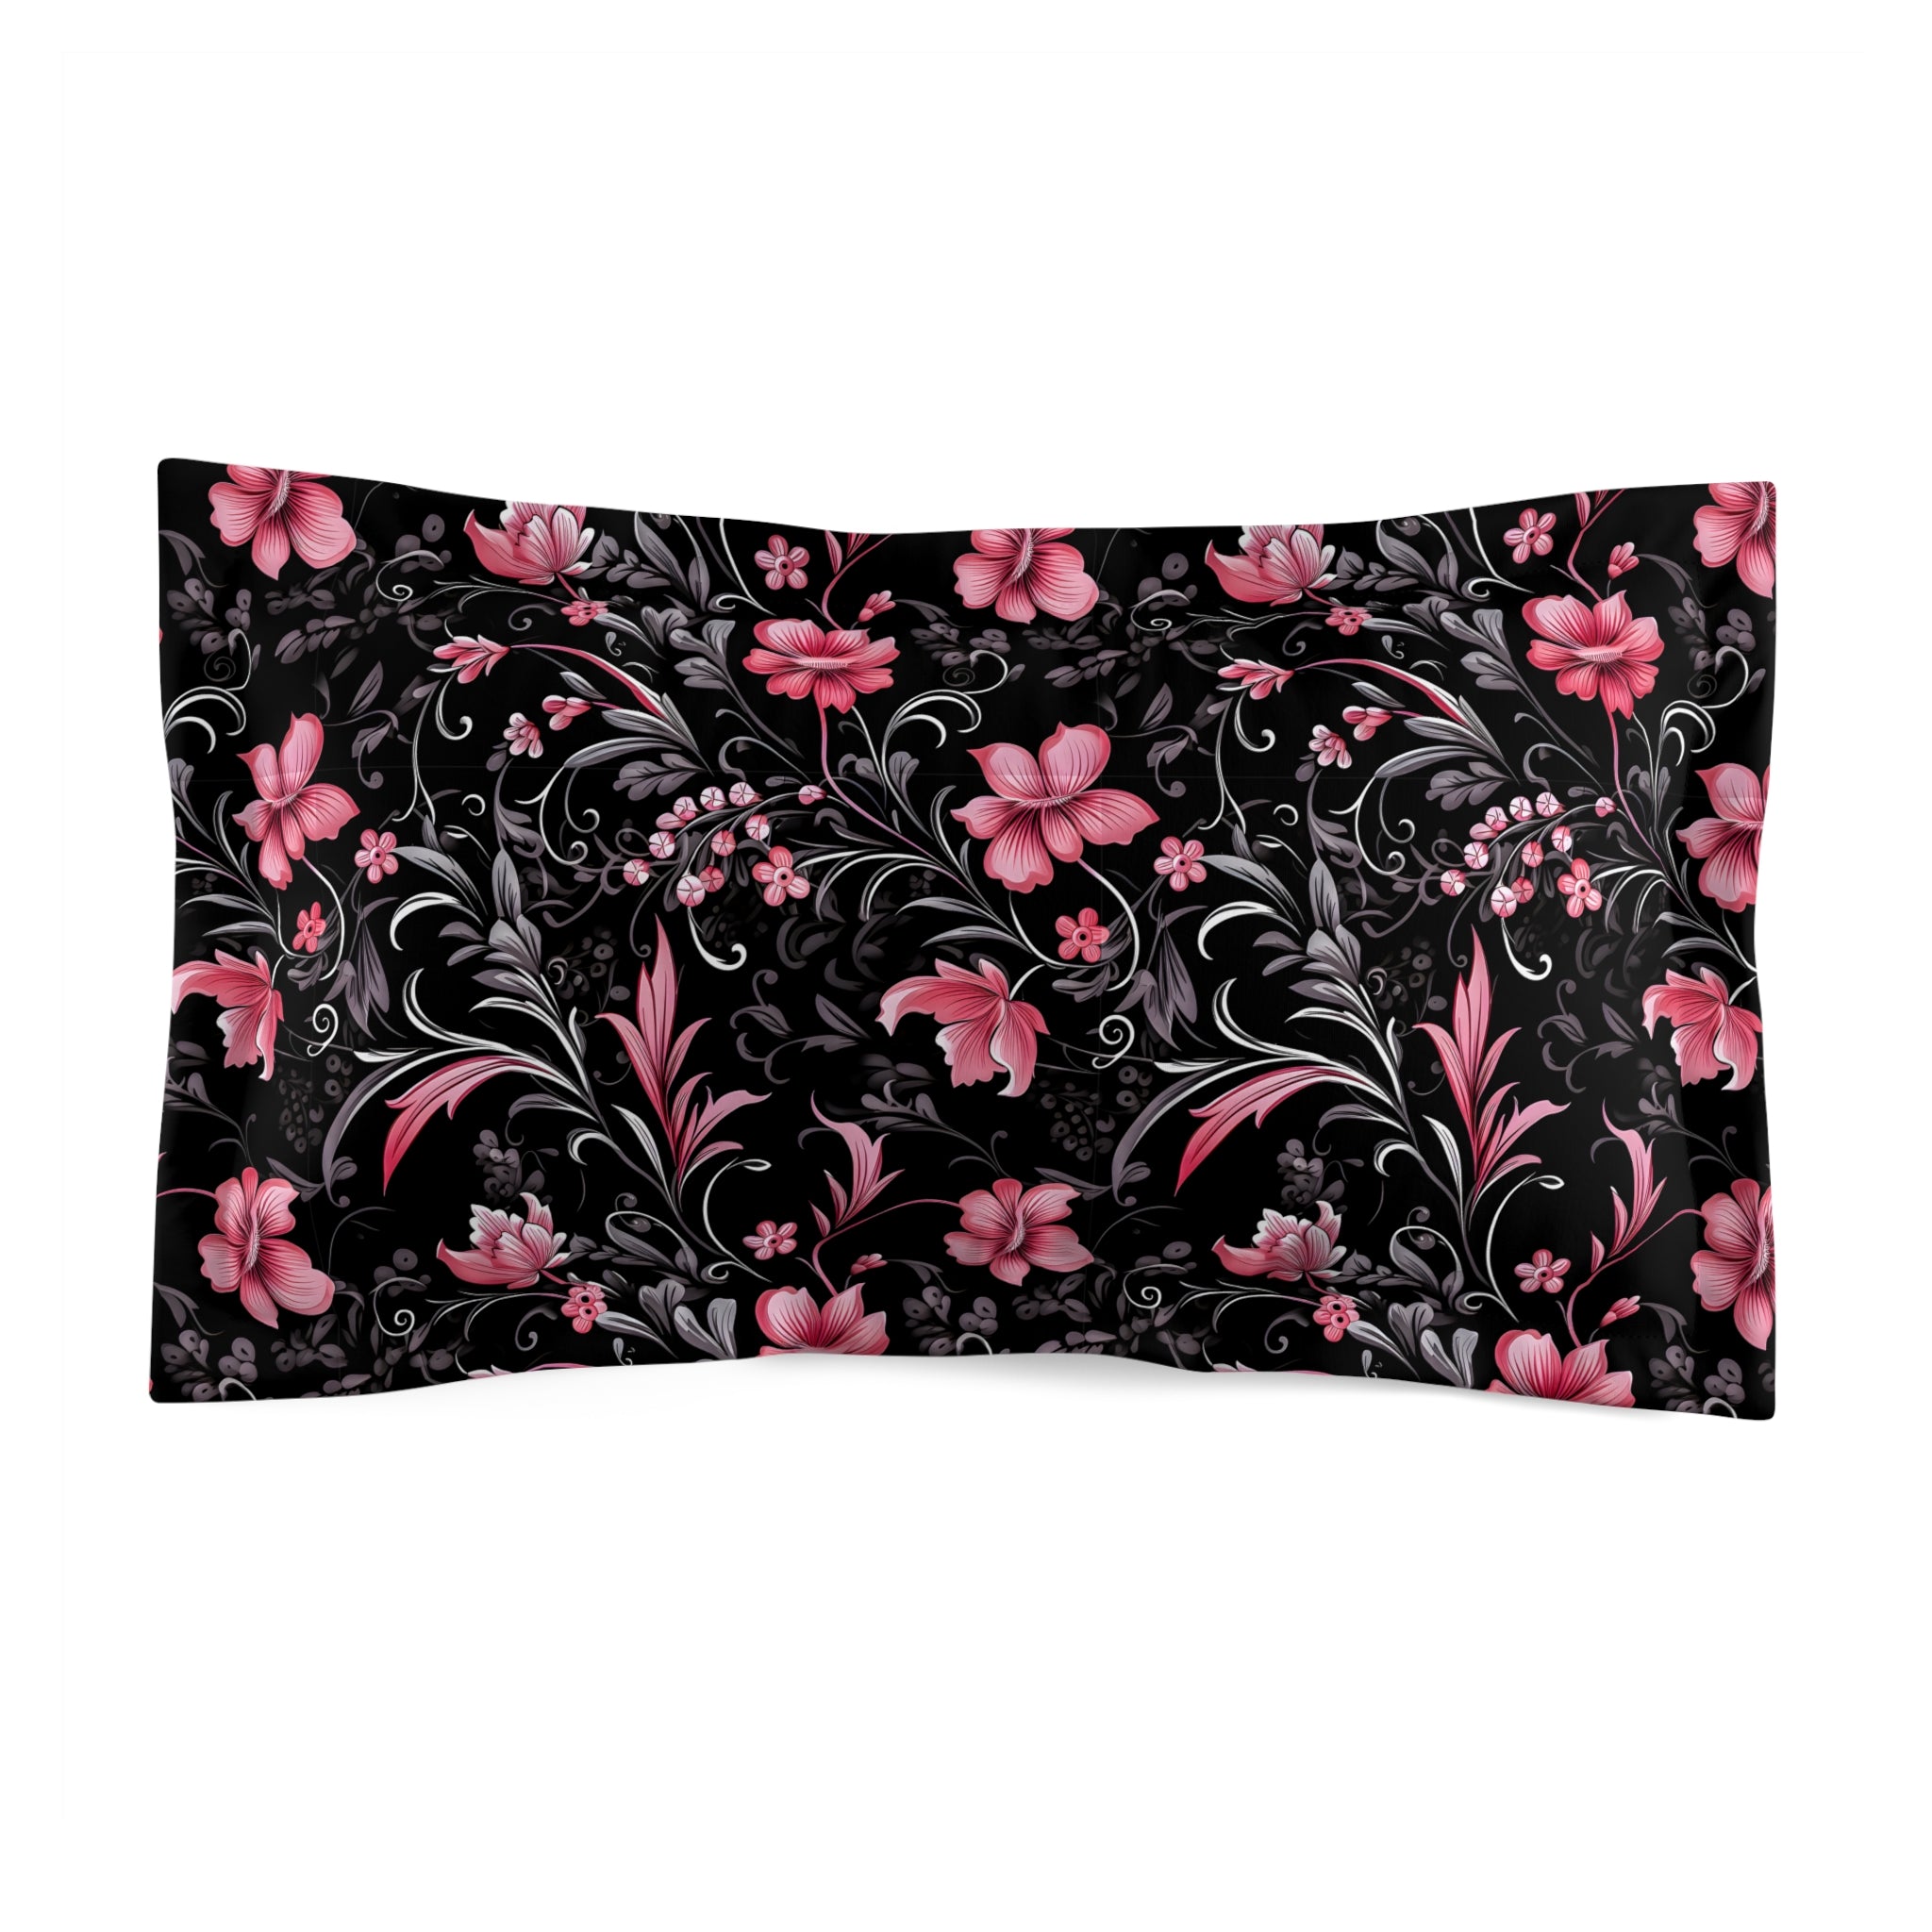 Pink Blossoms of Darkness Duvet Cover